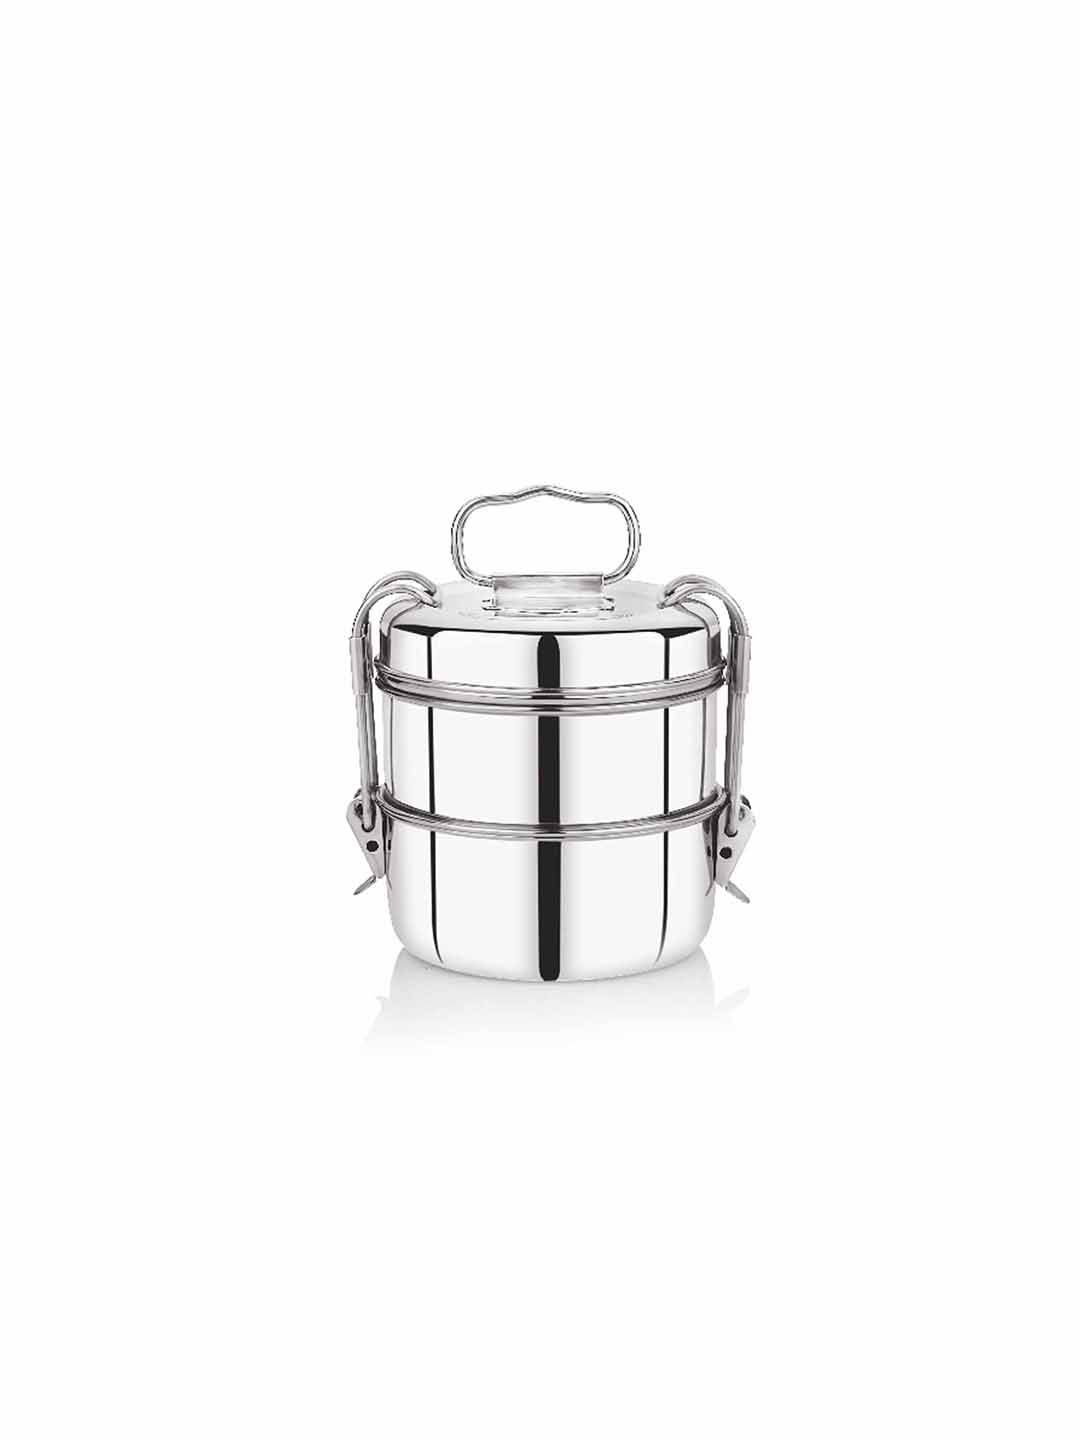 PDDFALCON Silver-Toned Stainless Steel Lunch Box 1350ml Price in India